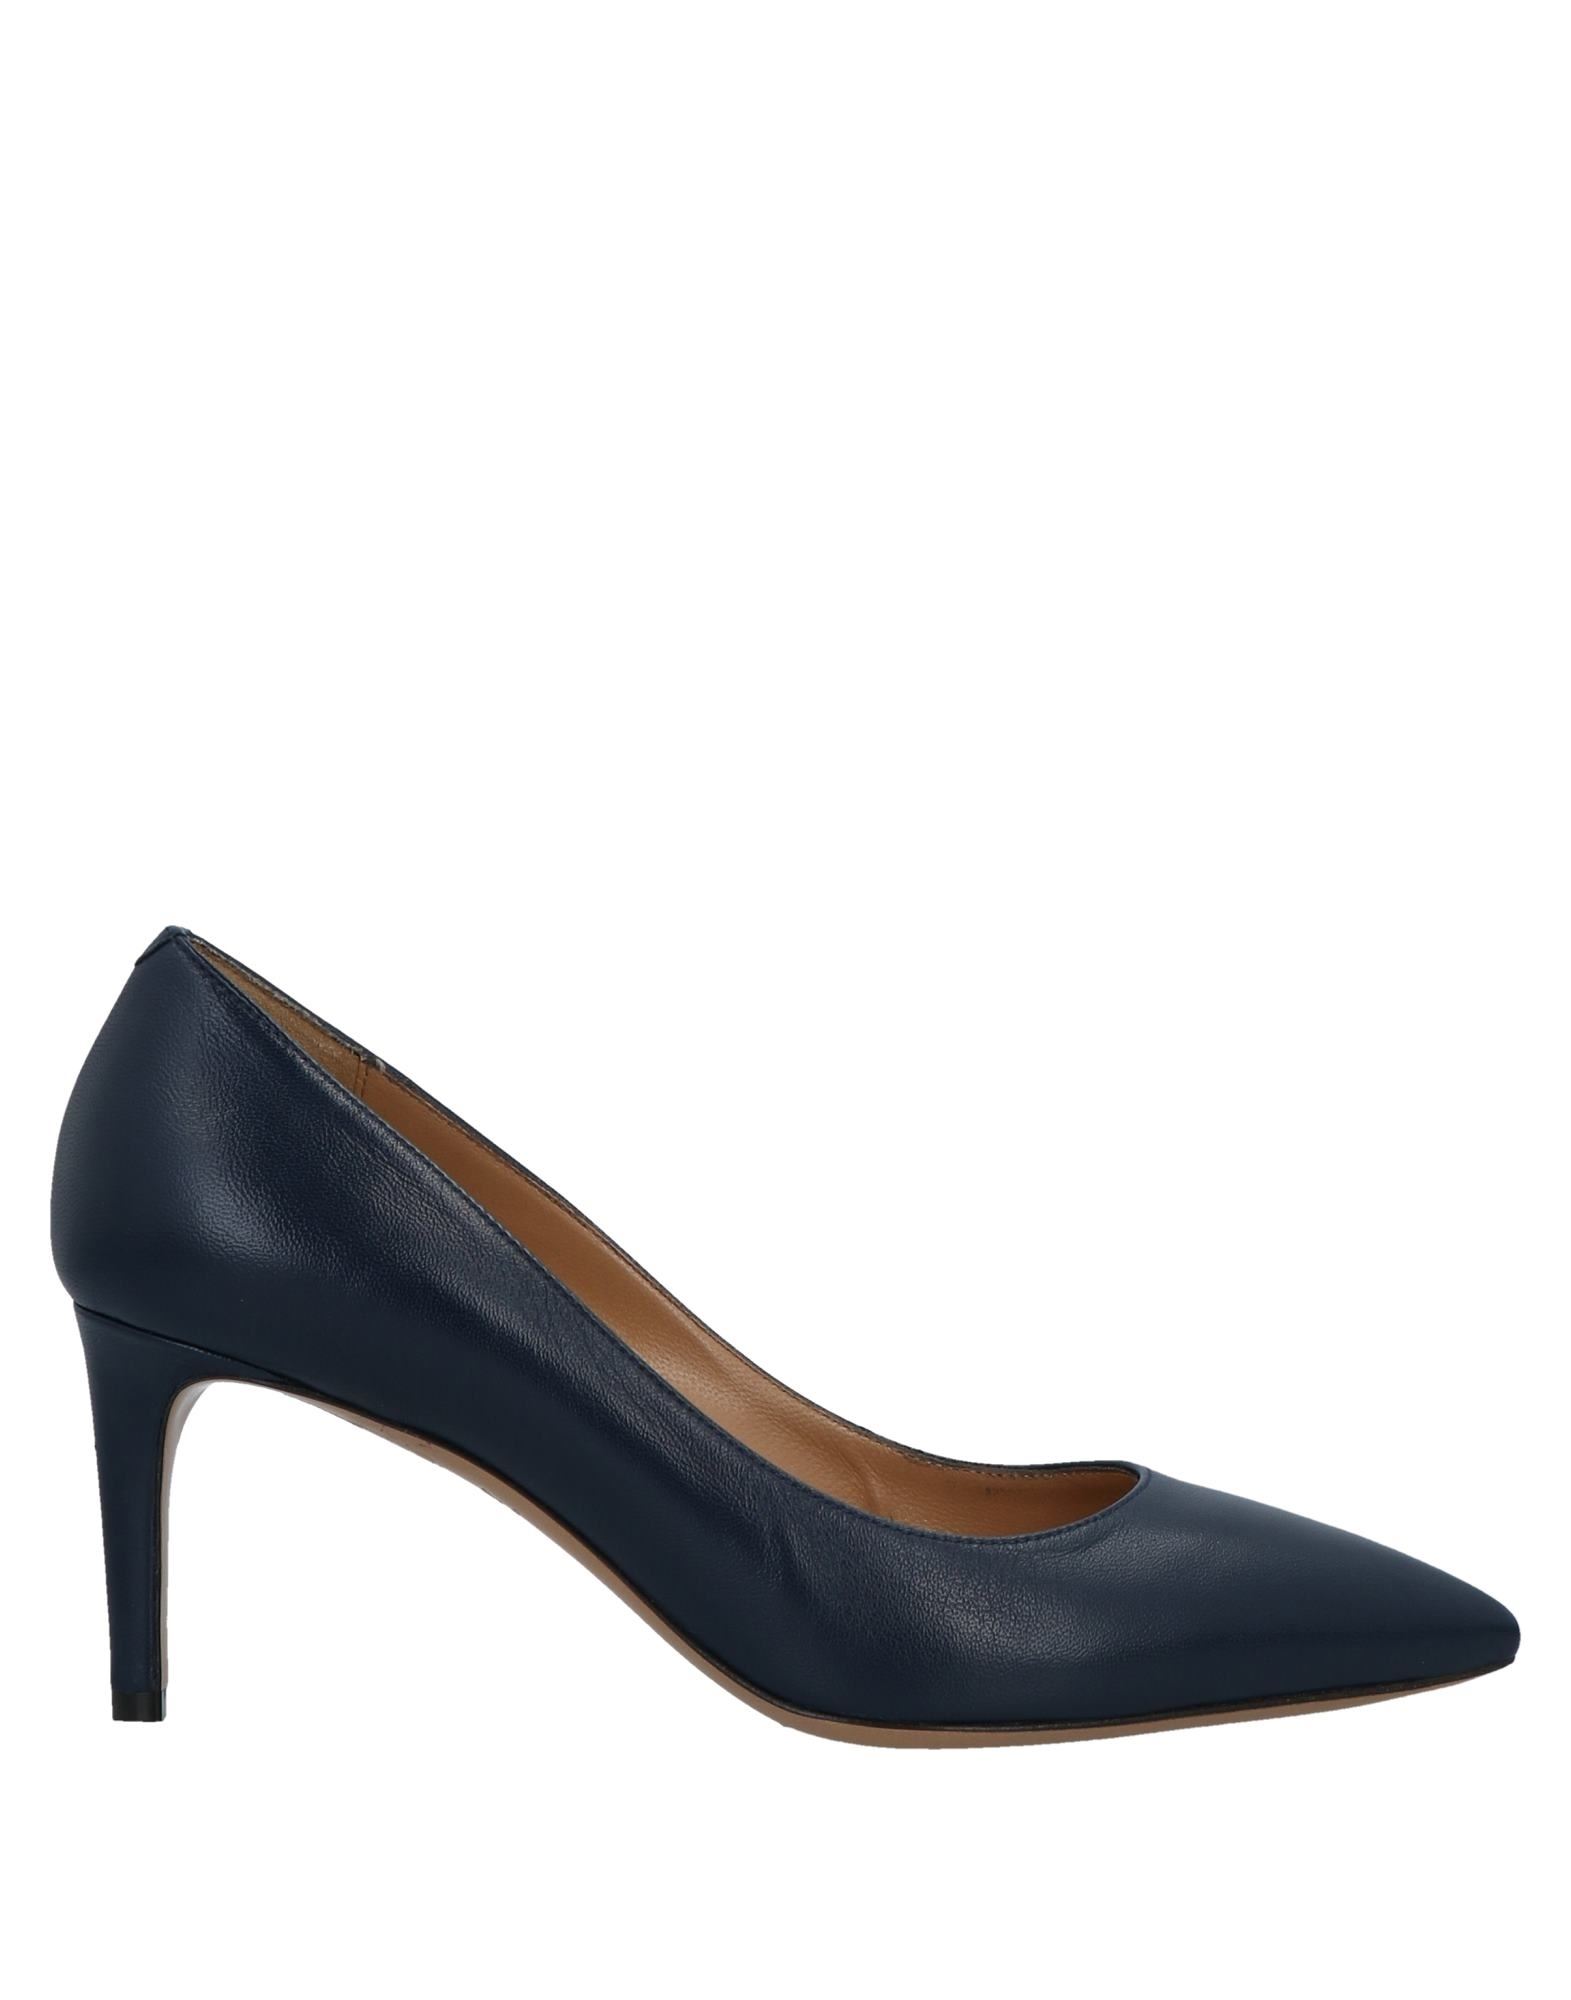 Bally Pumps In Navy Blue